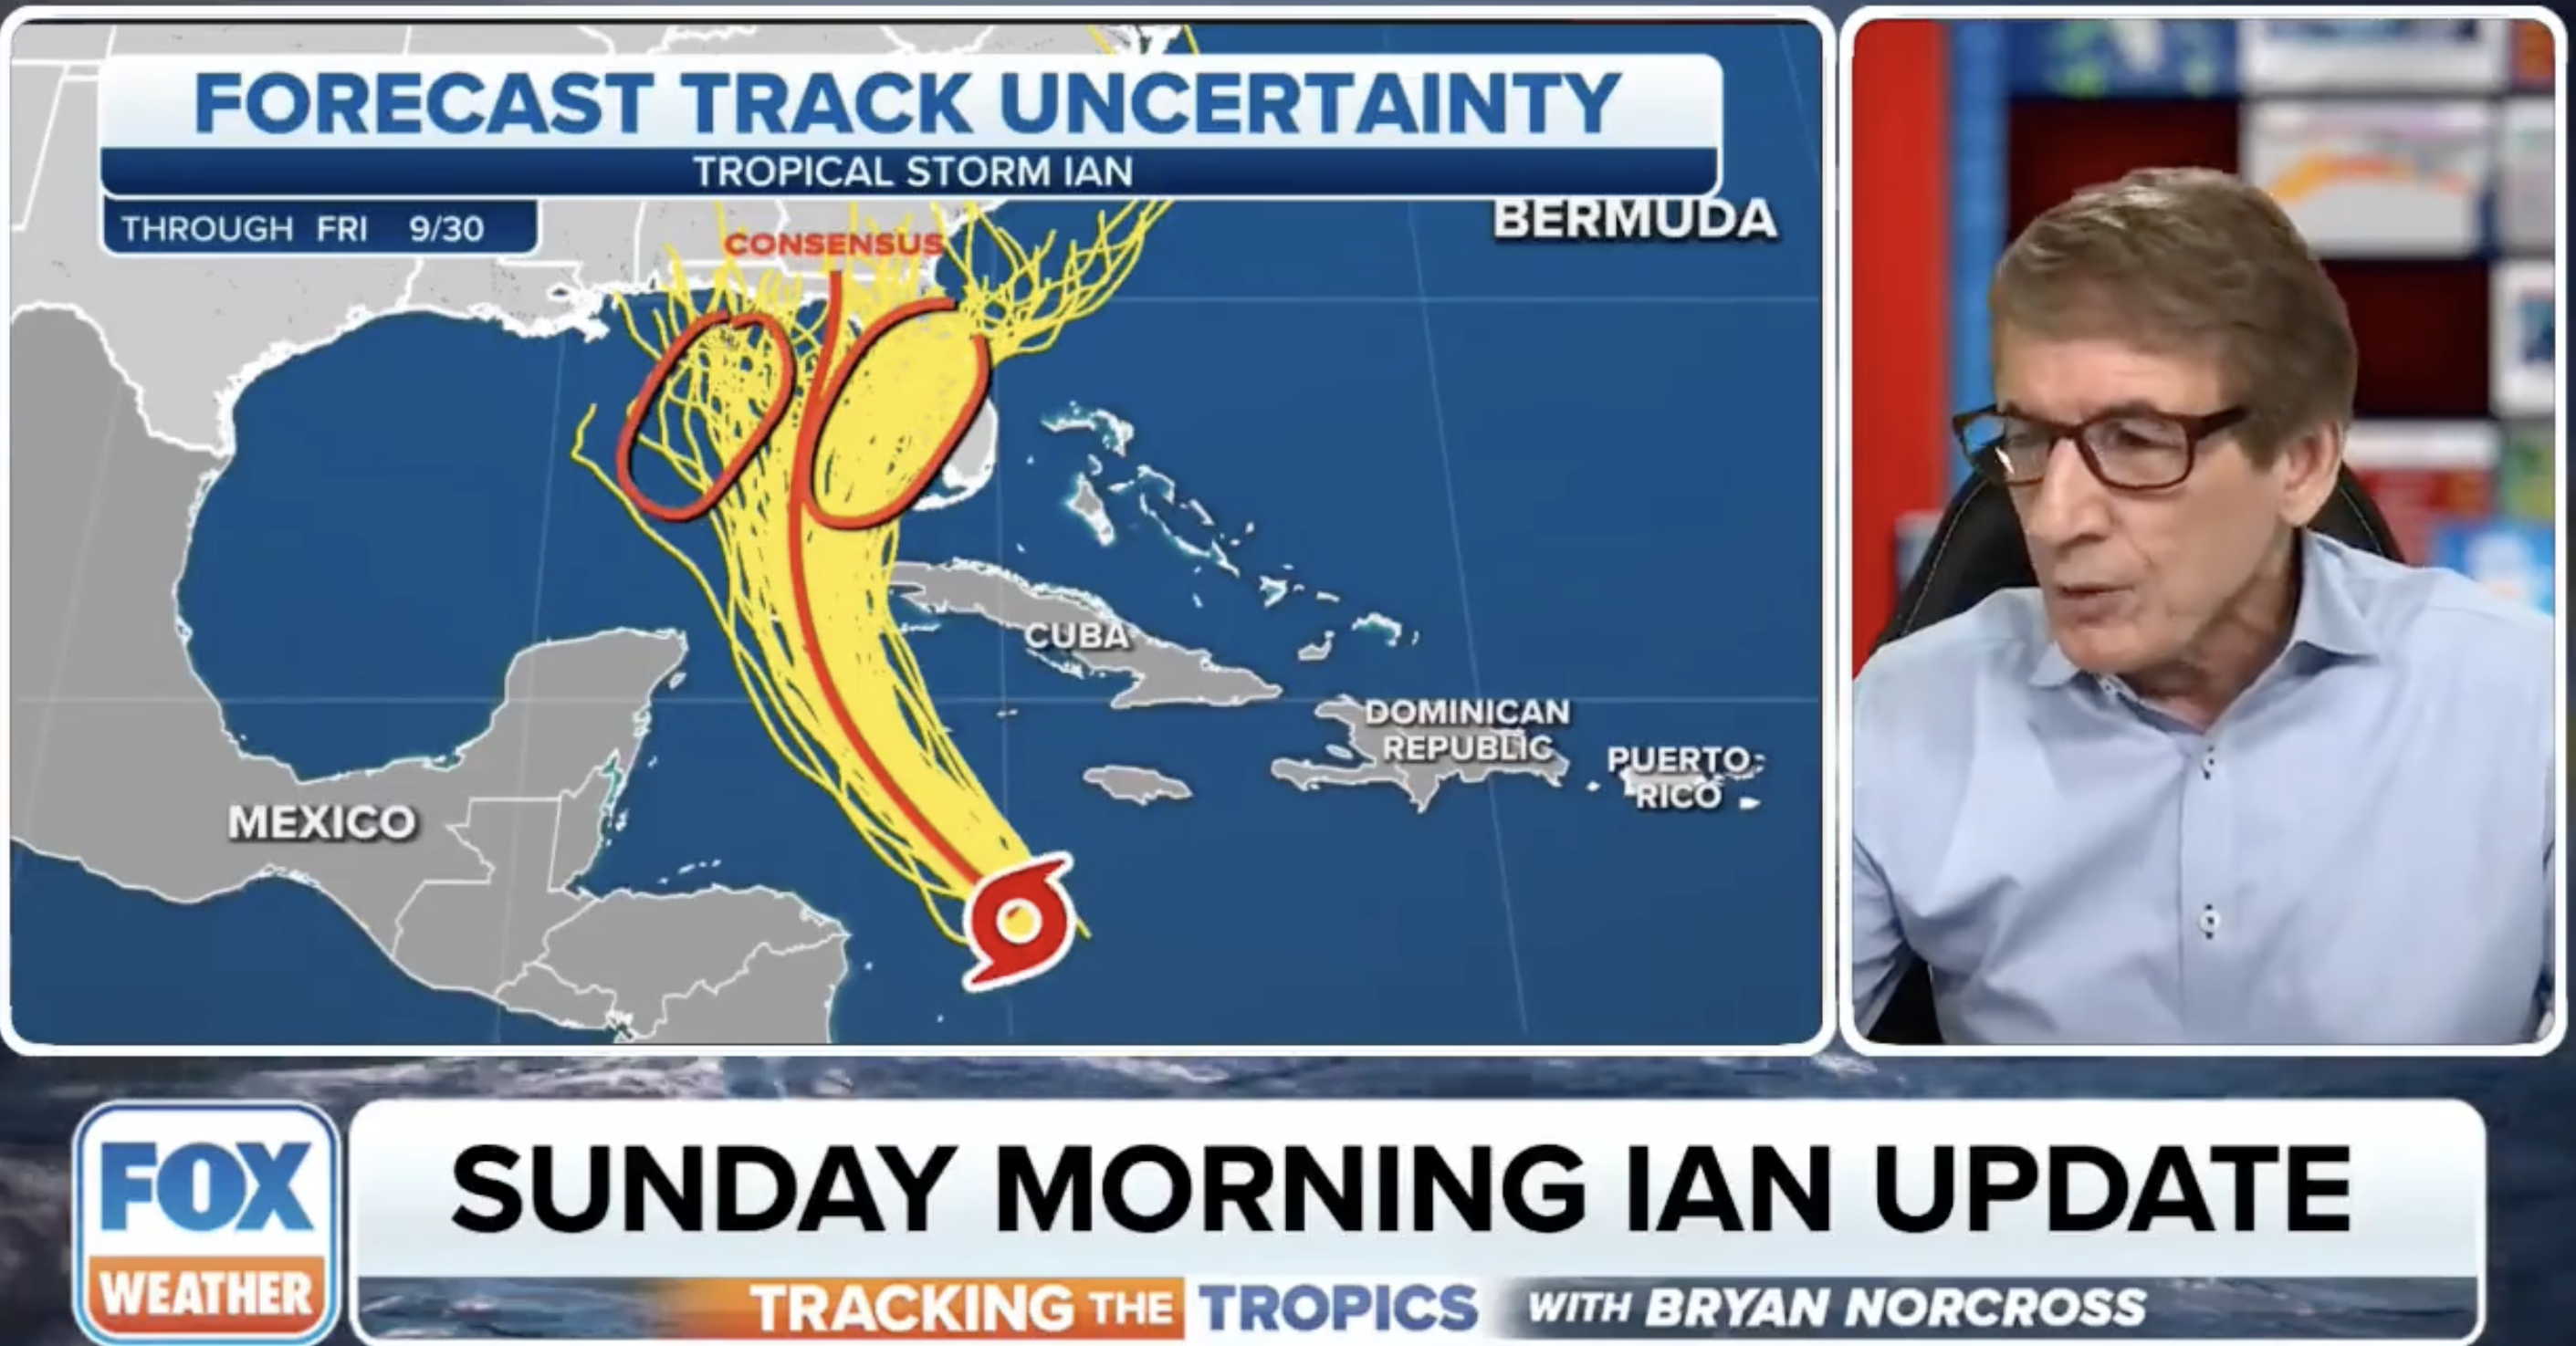 WATCH: Fox Meteorologist Inadvertently Draws a Penis with His Telestrator During Hurricane Ian Forecast